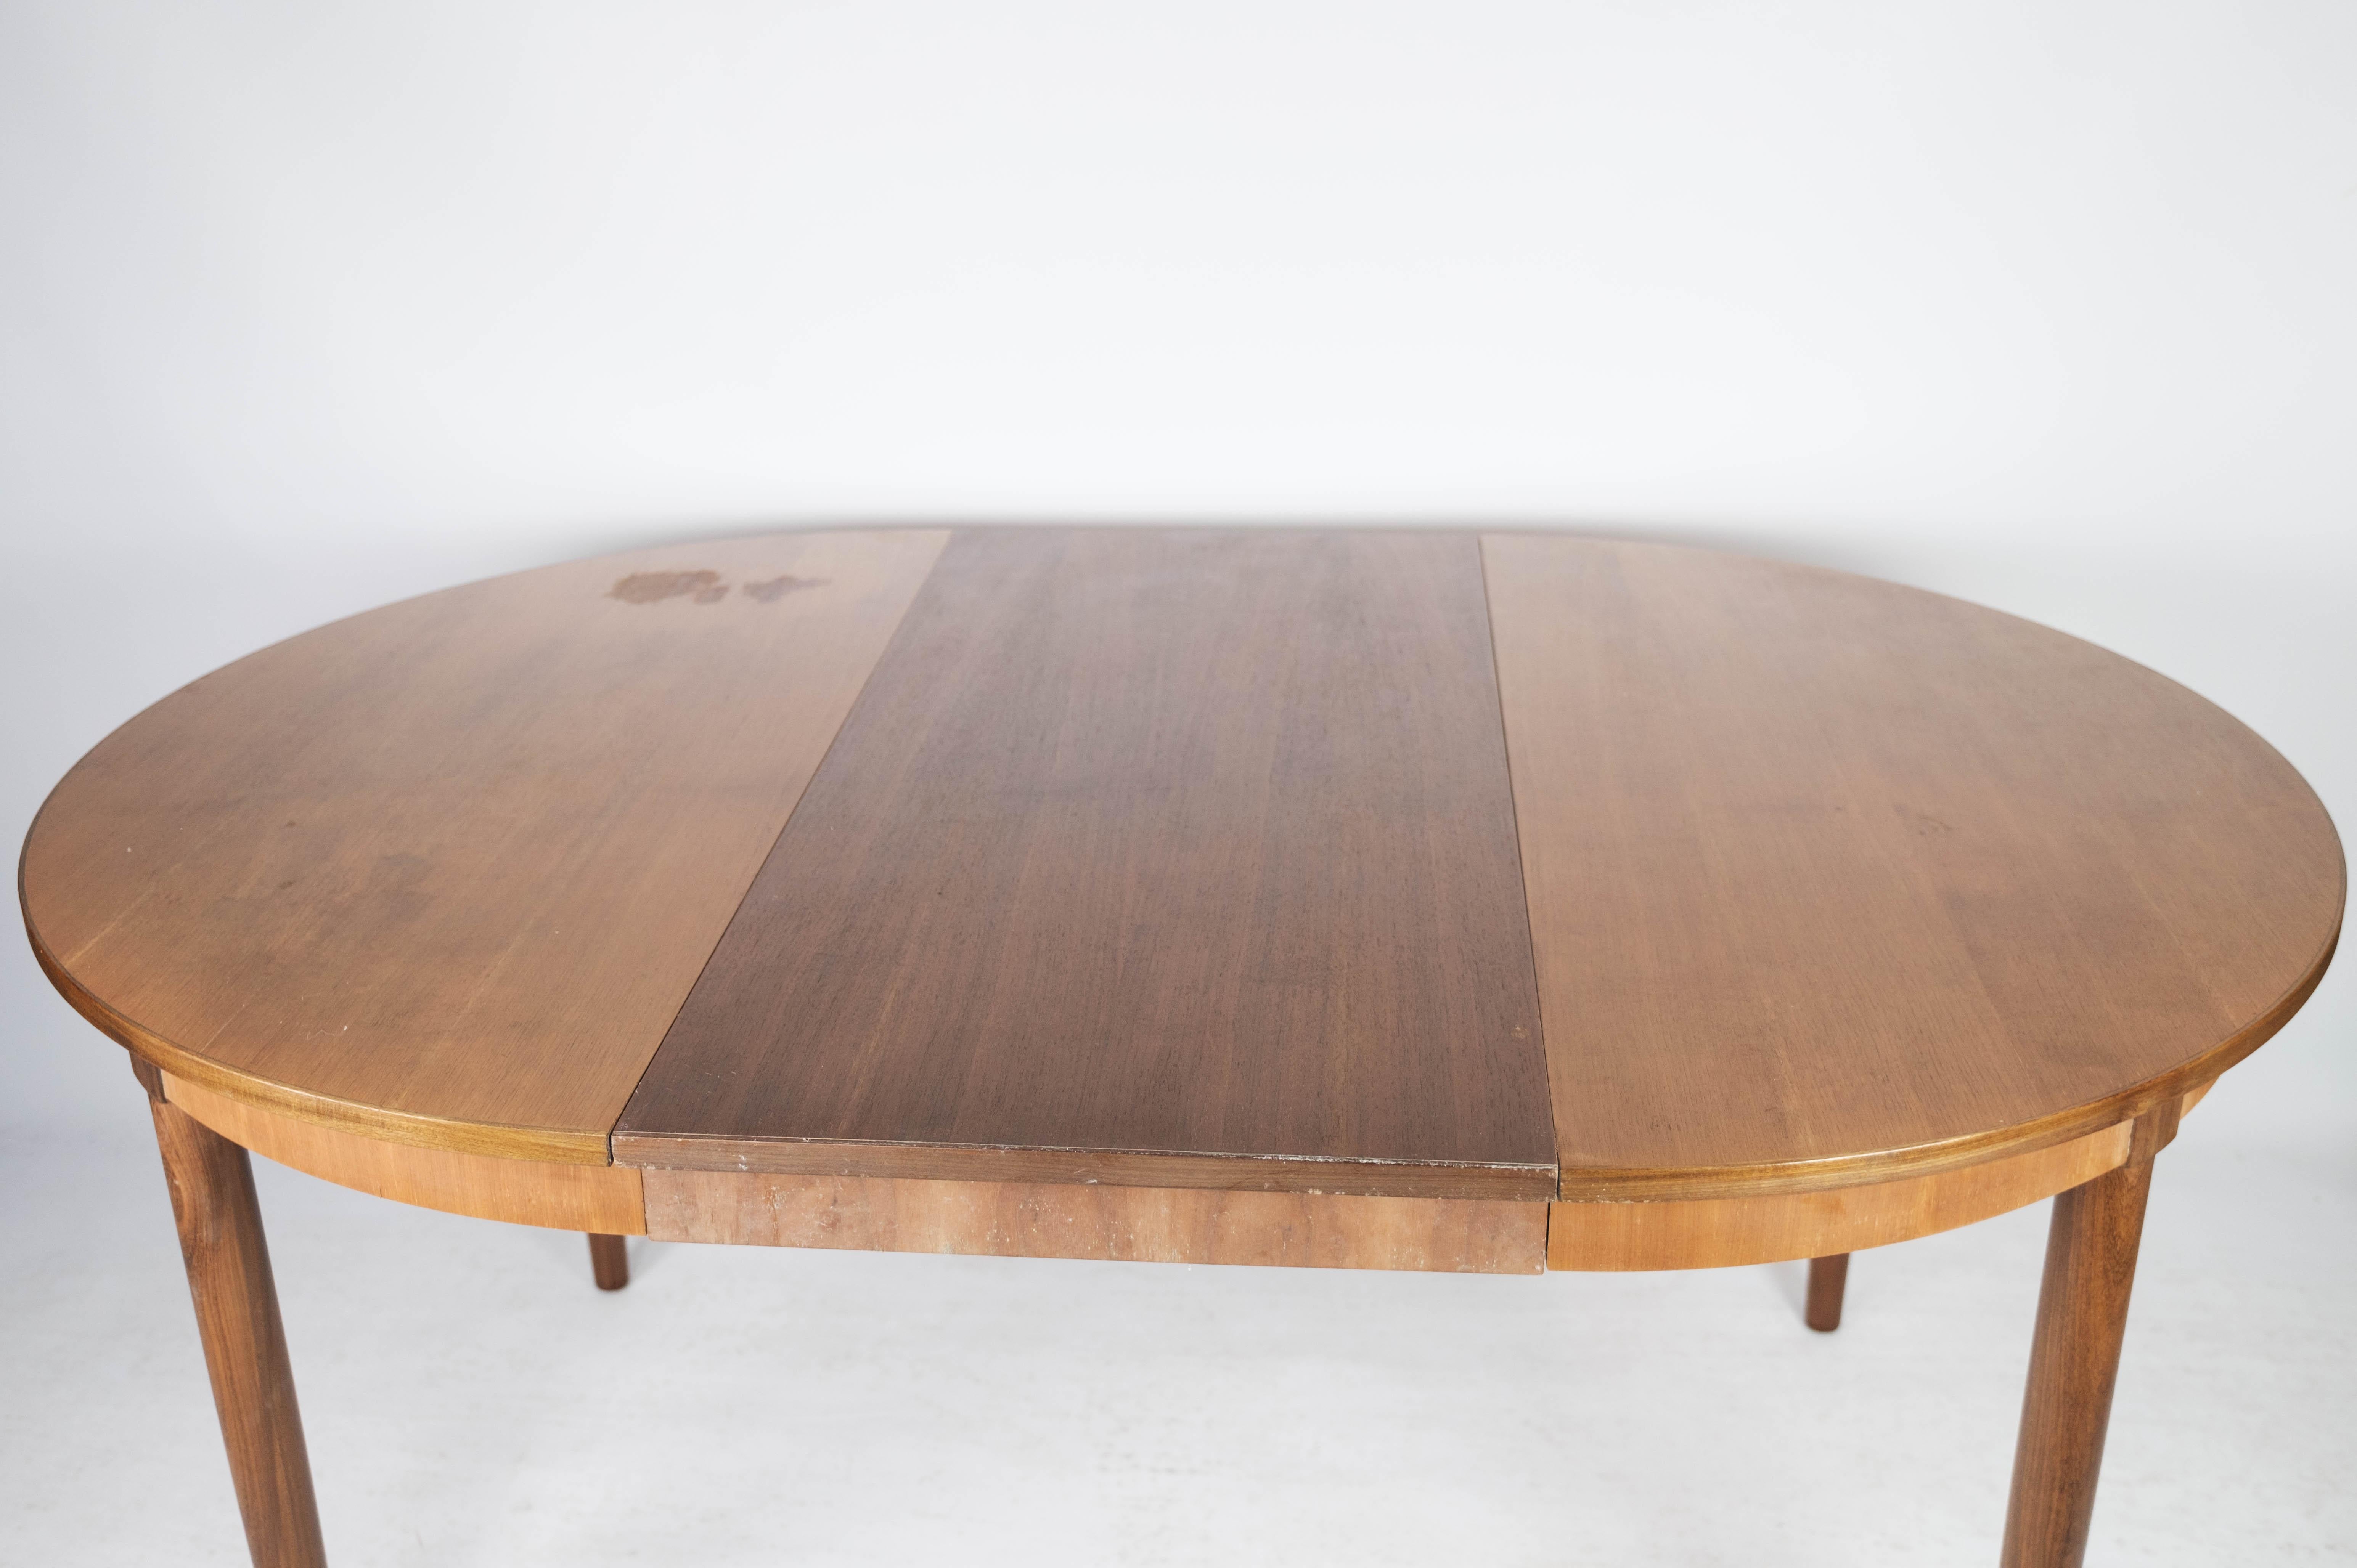 Dining Table Made In Teak With Extensions, Danish Design From 1960s For Sale 7